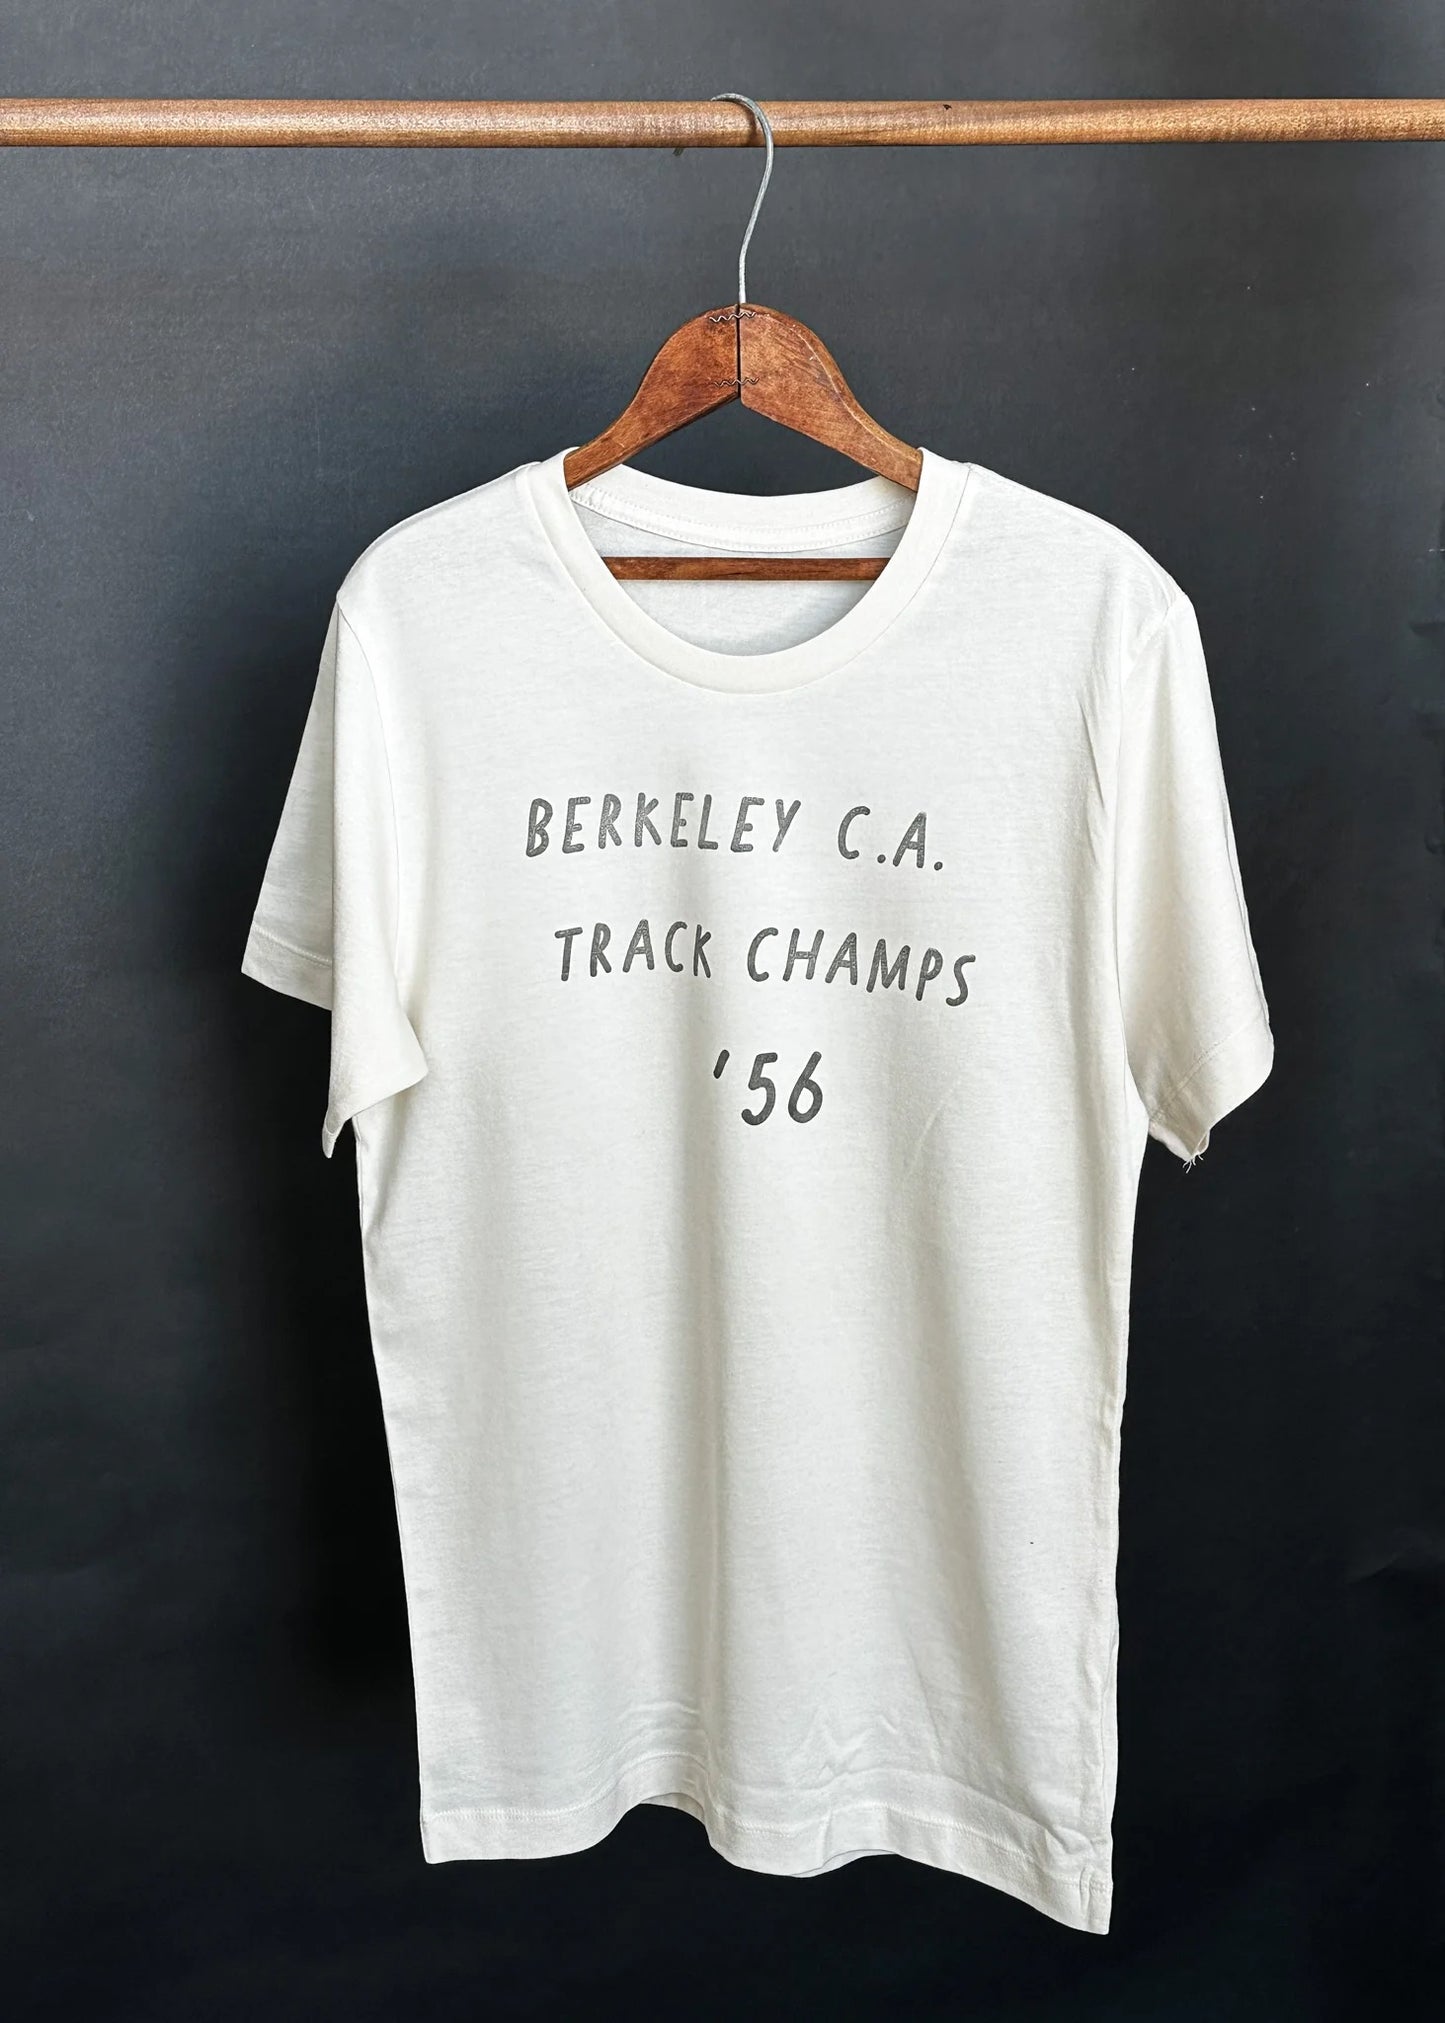 BERKELEY C.A. TRACK CHAMPS '56 HAND STAMPED TEE